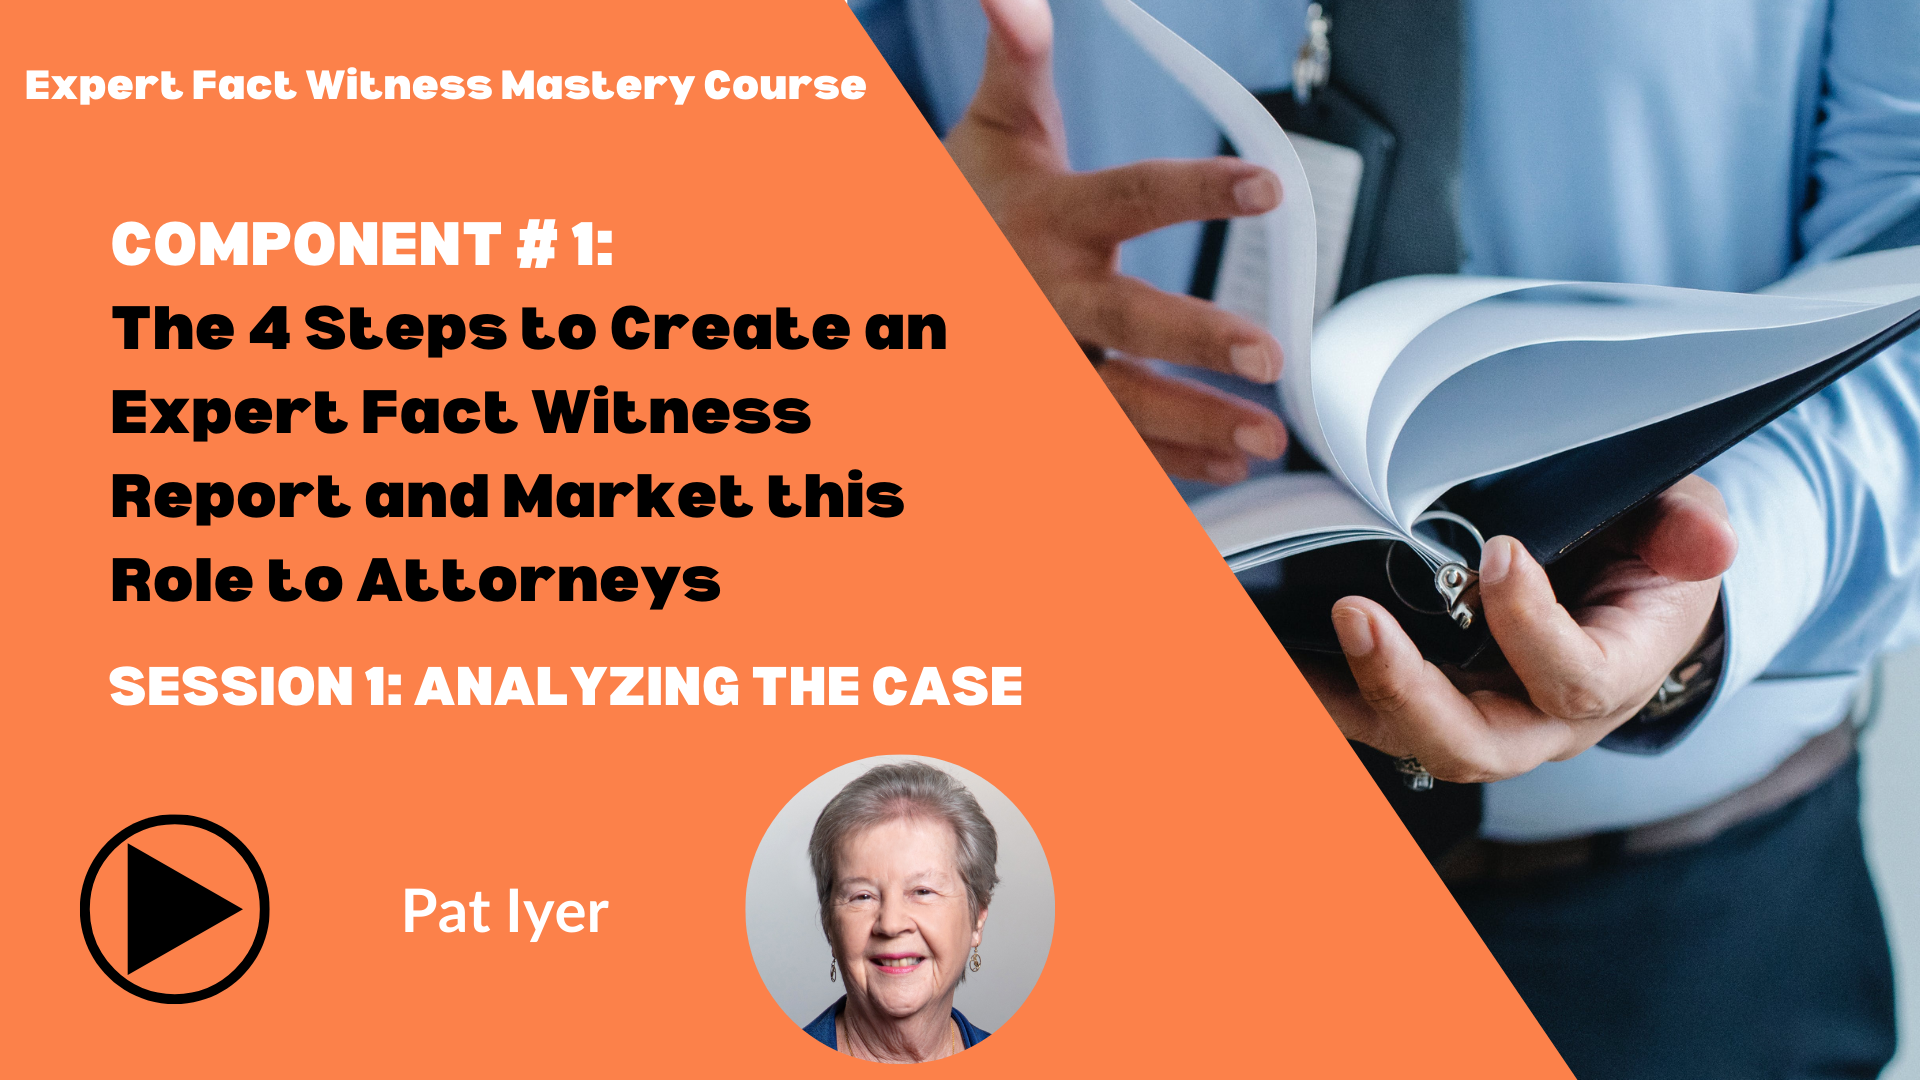 Pat Iyer - C1 Expert Fact Witness Mastery - Analyzing the Case